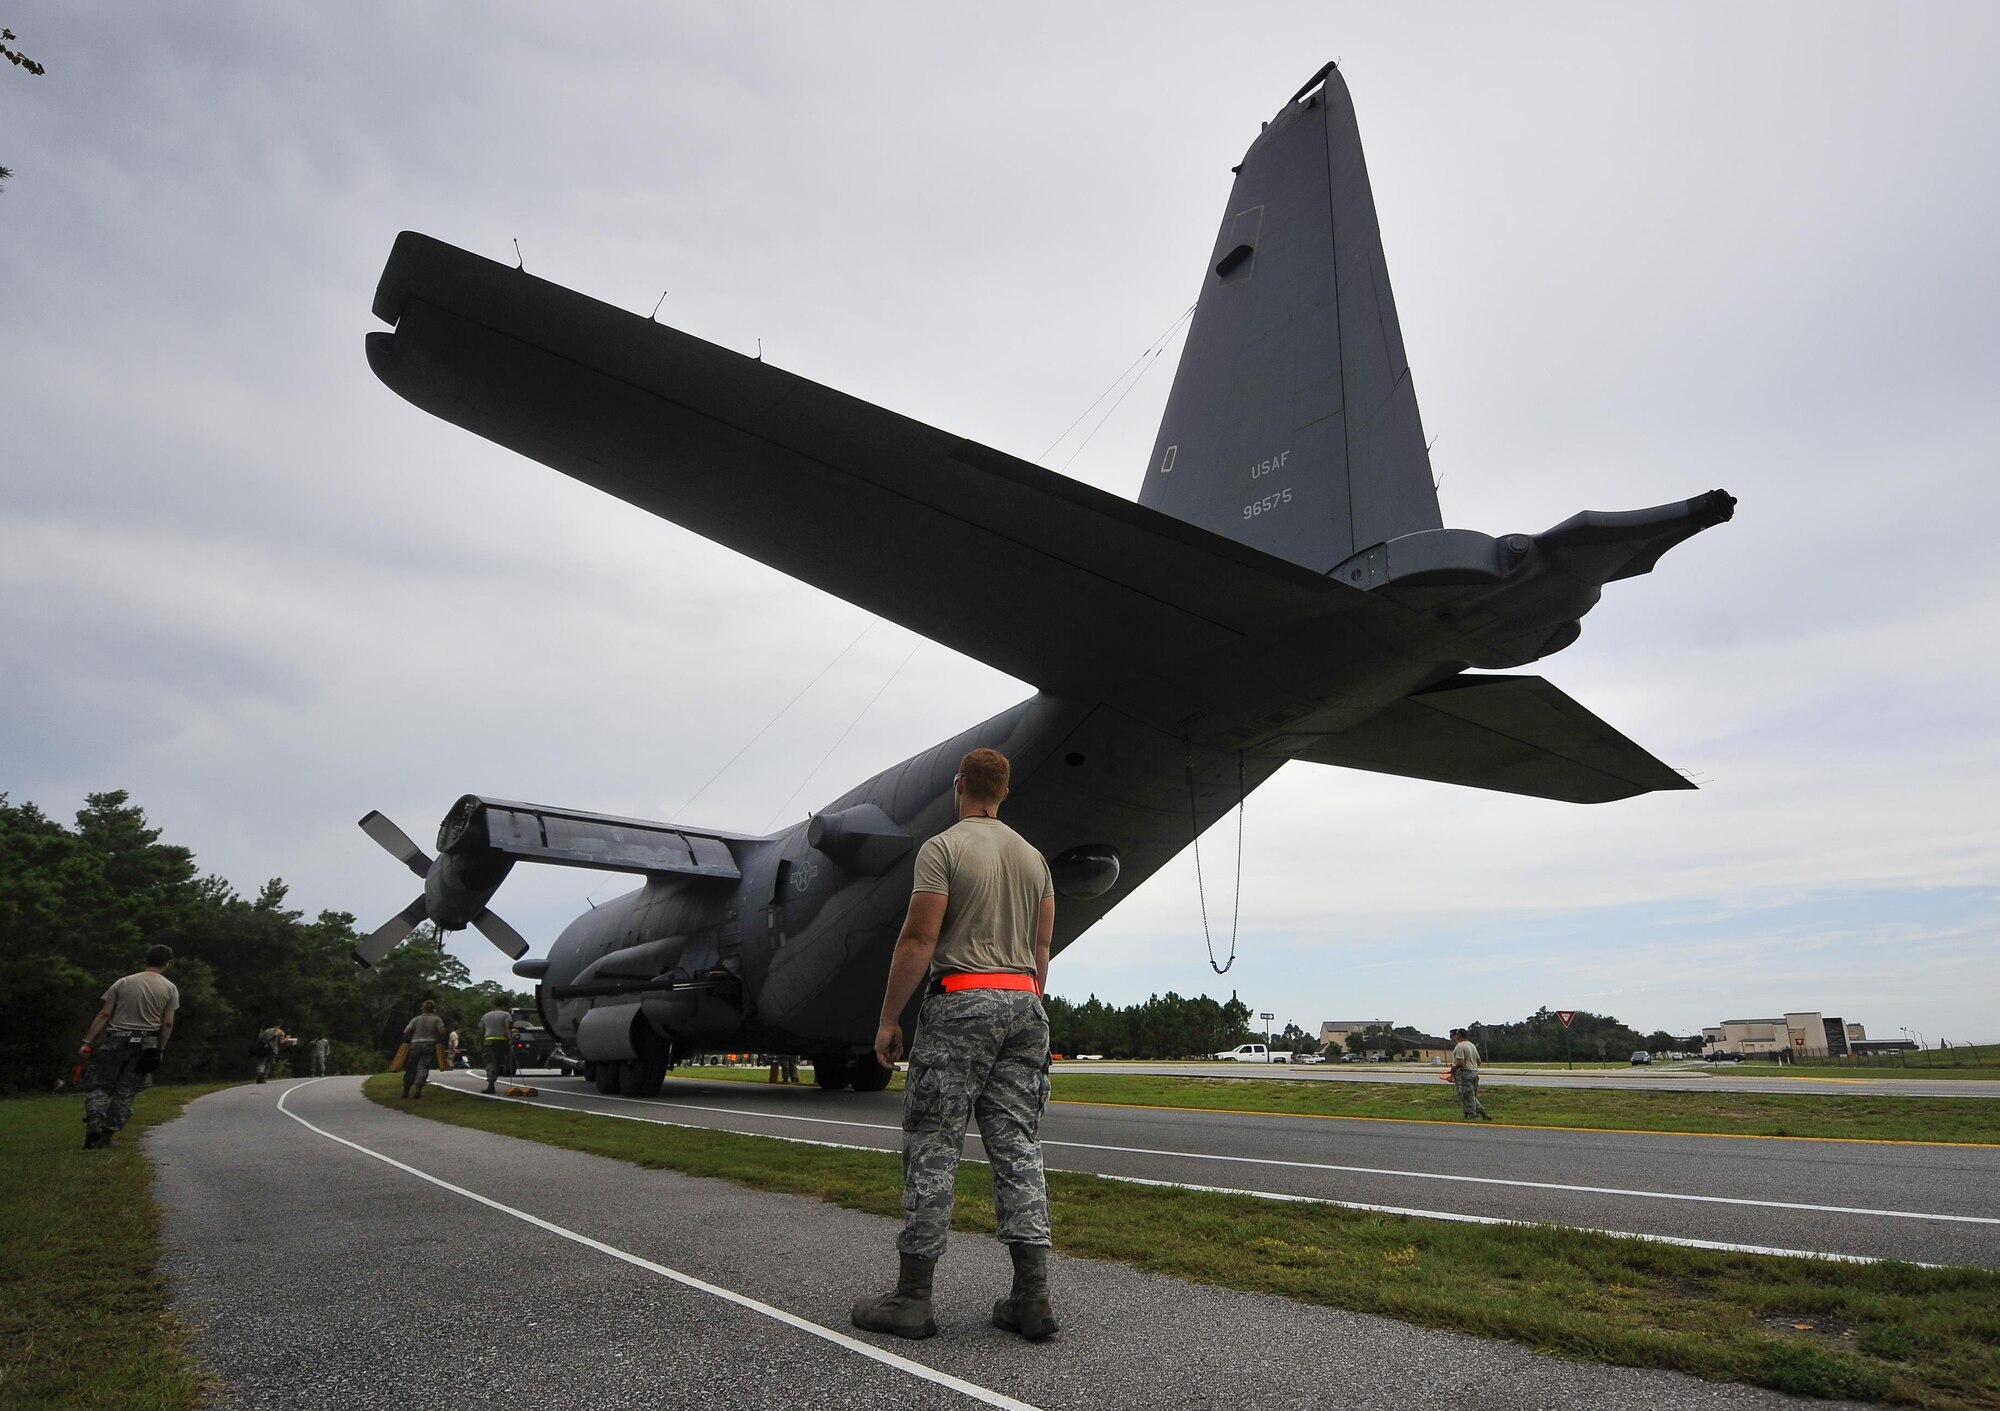 Airmen with the 1st Special Operations Aircraft Maintenance Squadron escort an AC-130H Spectre enroute to the Air Park on Hurlburt Field, Fla., Aug. 15, 2015. The Spectre was towed from the flightline and staged for installation in the Hurlburt Field Air Park. The AC-130H fleet retired May 26, 2015, after more than 45 years of service. The installation process for this aircraft, known as “Wicked Wanda,” is set to be complete by Aug. 28, 2015. (U.S. Air Force photo by Airman Kai White/Released)